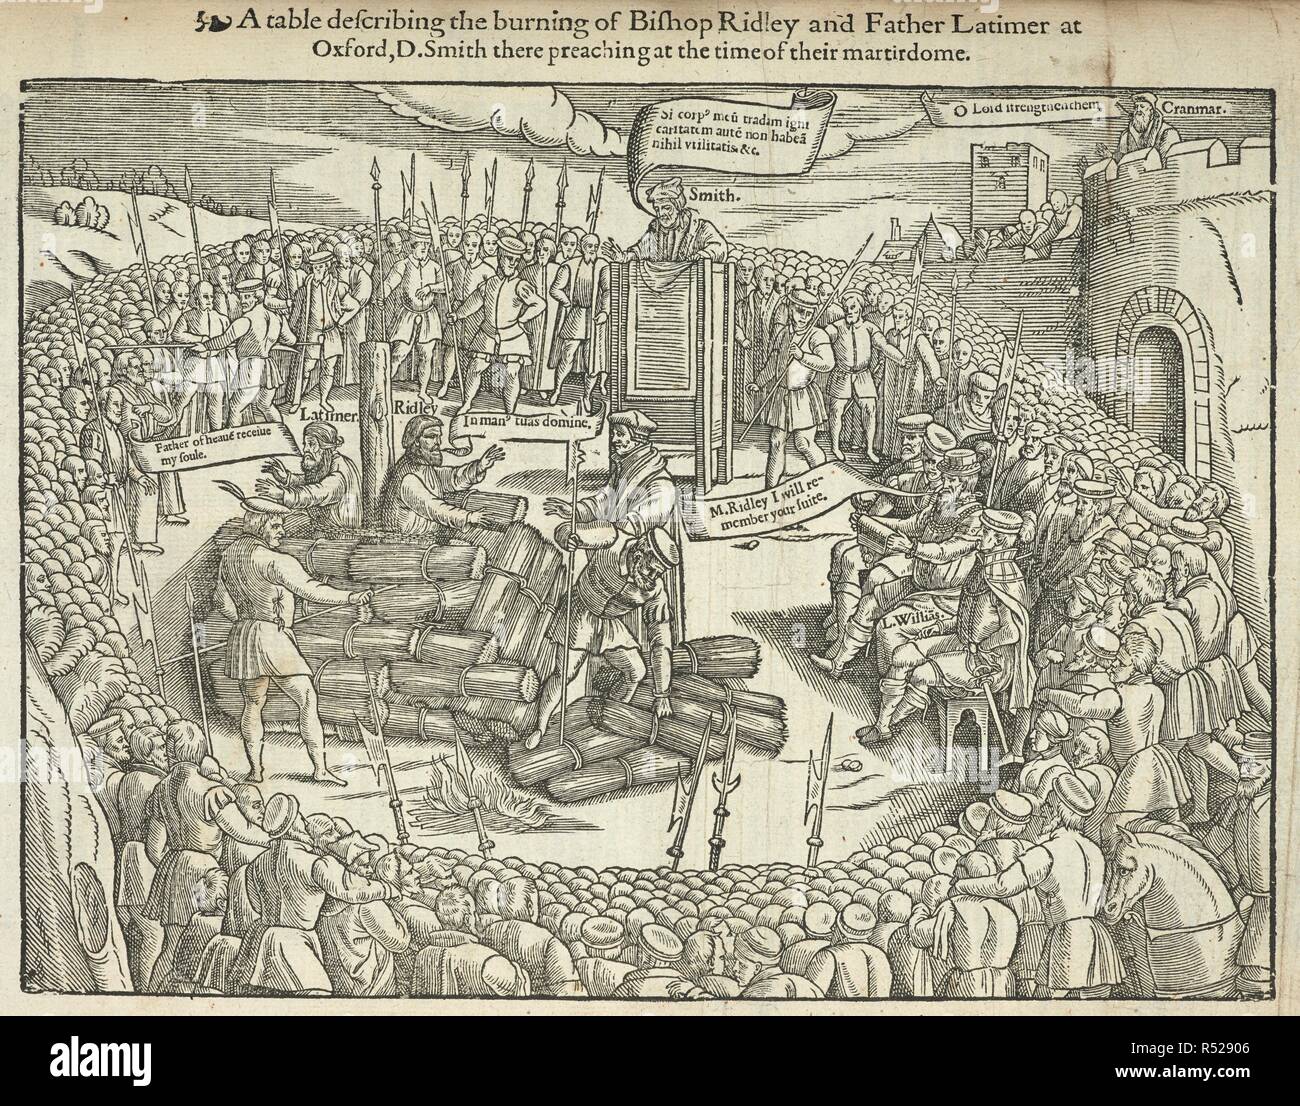 'A table describing the burning of Bishop Ridley and Father Latimer at Oxford ...'. Hugh Latimer and Nicholas Ridley were burnt at the stake on the 16th October 1555. They became known as the Oxford Martyrs of Anglicanism, along with Thomas Cranmer. Actes and monuments of these latter and perillous dayes ... [ Foxe's Book of Martyrs]. London, 1583. Source: 4824.k.3 opposite page 1783. Author: FOXE, JOHN. Stock Photo